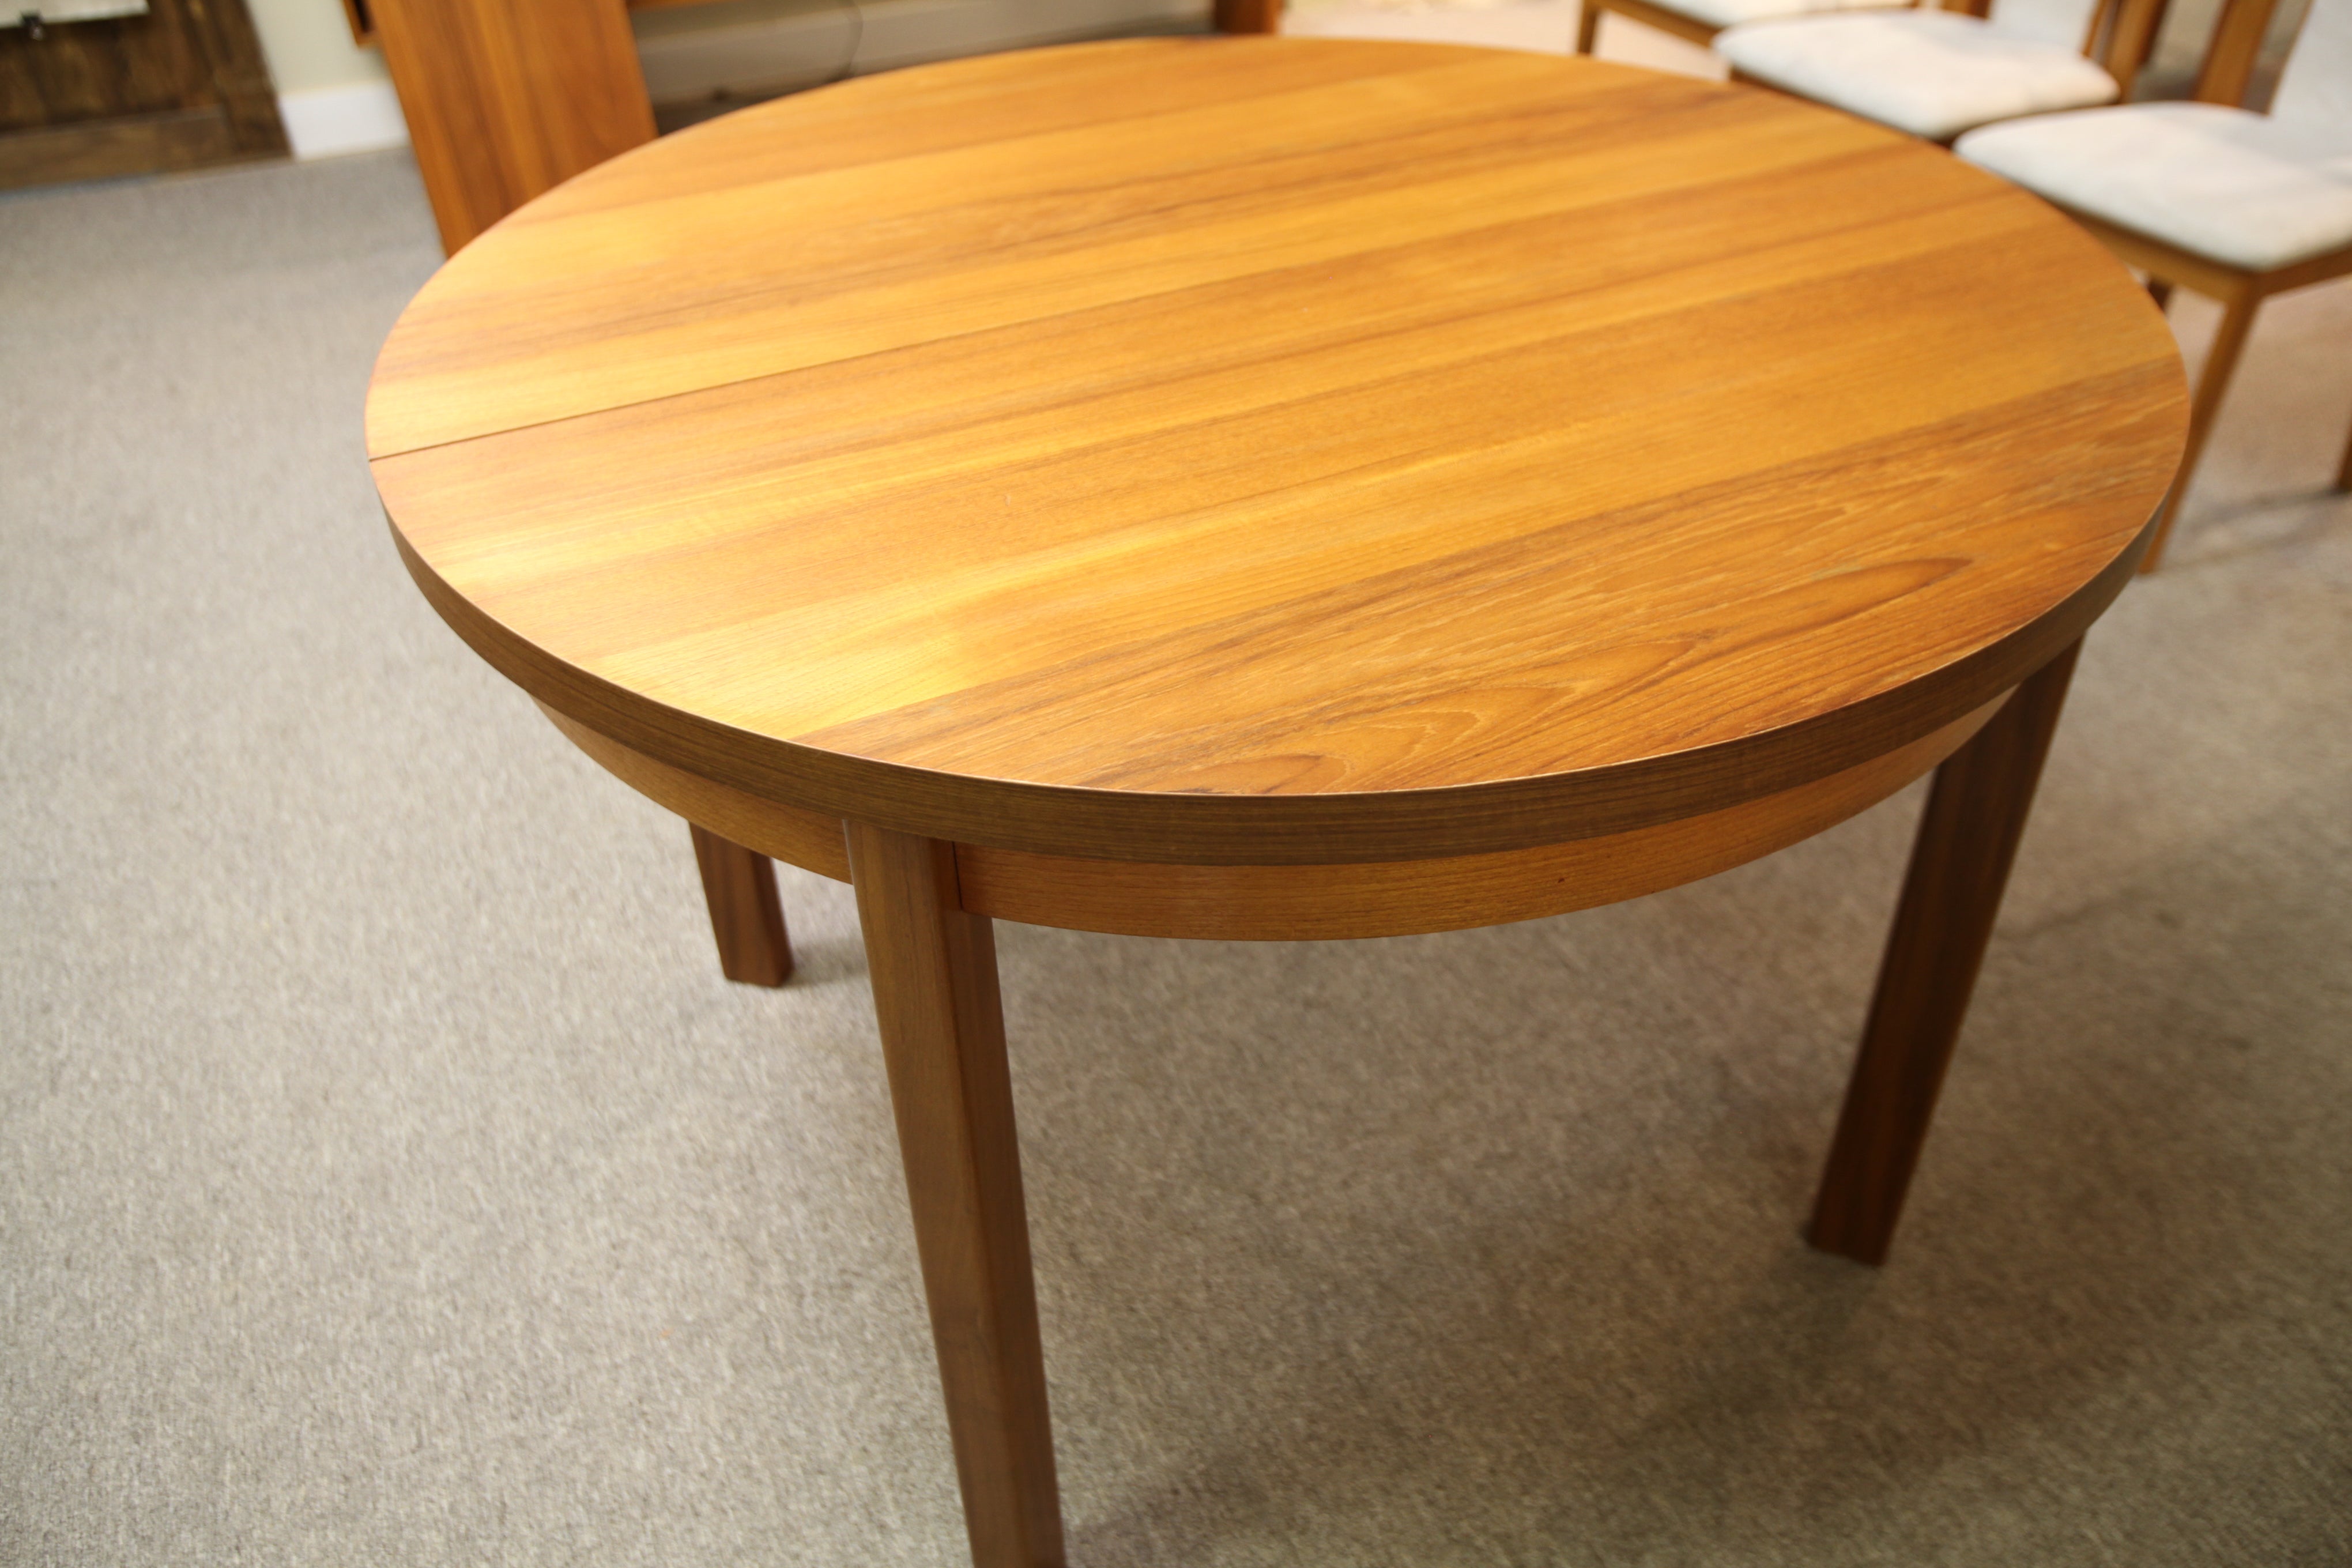 RS Associates Montreal Round Teak Dining Table W/ 2 Leafs (76"x44") or 44" round